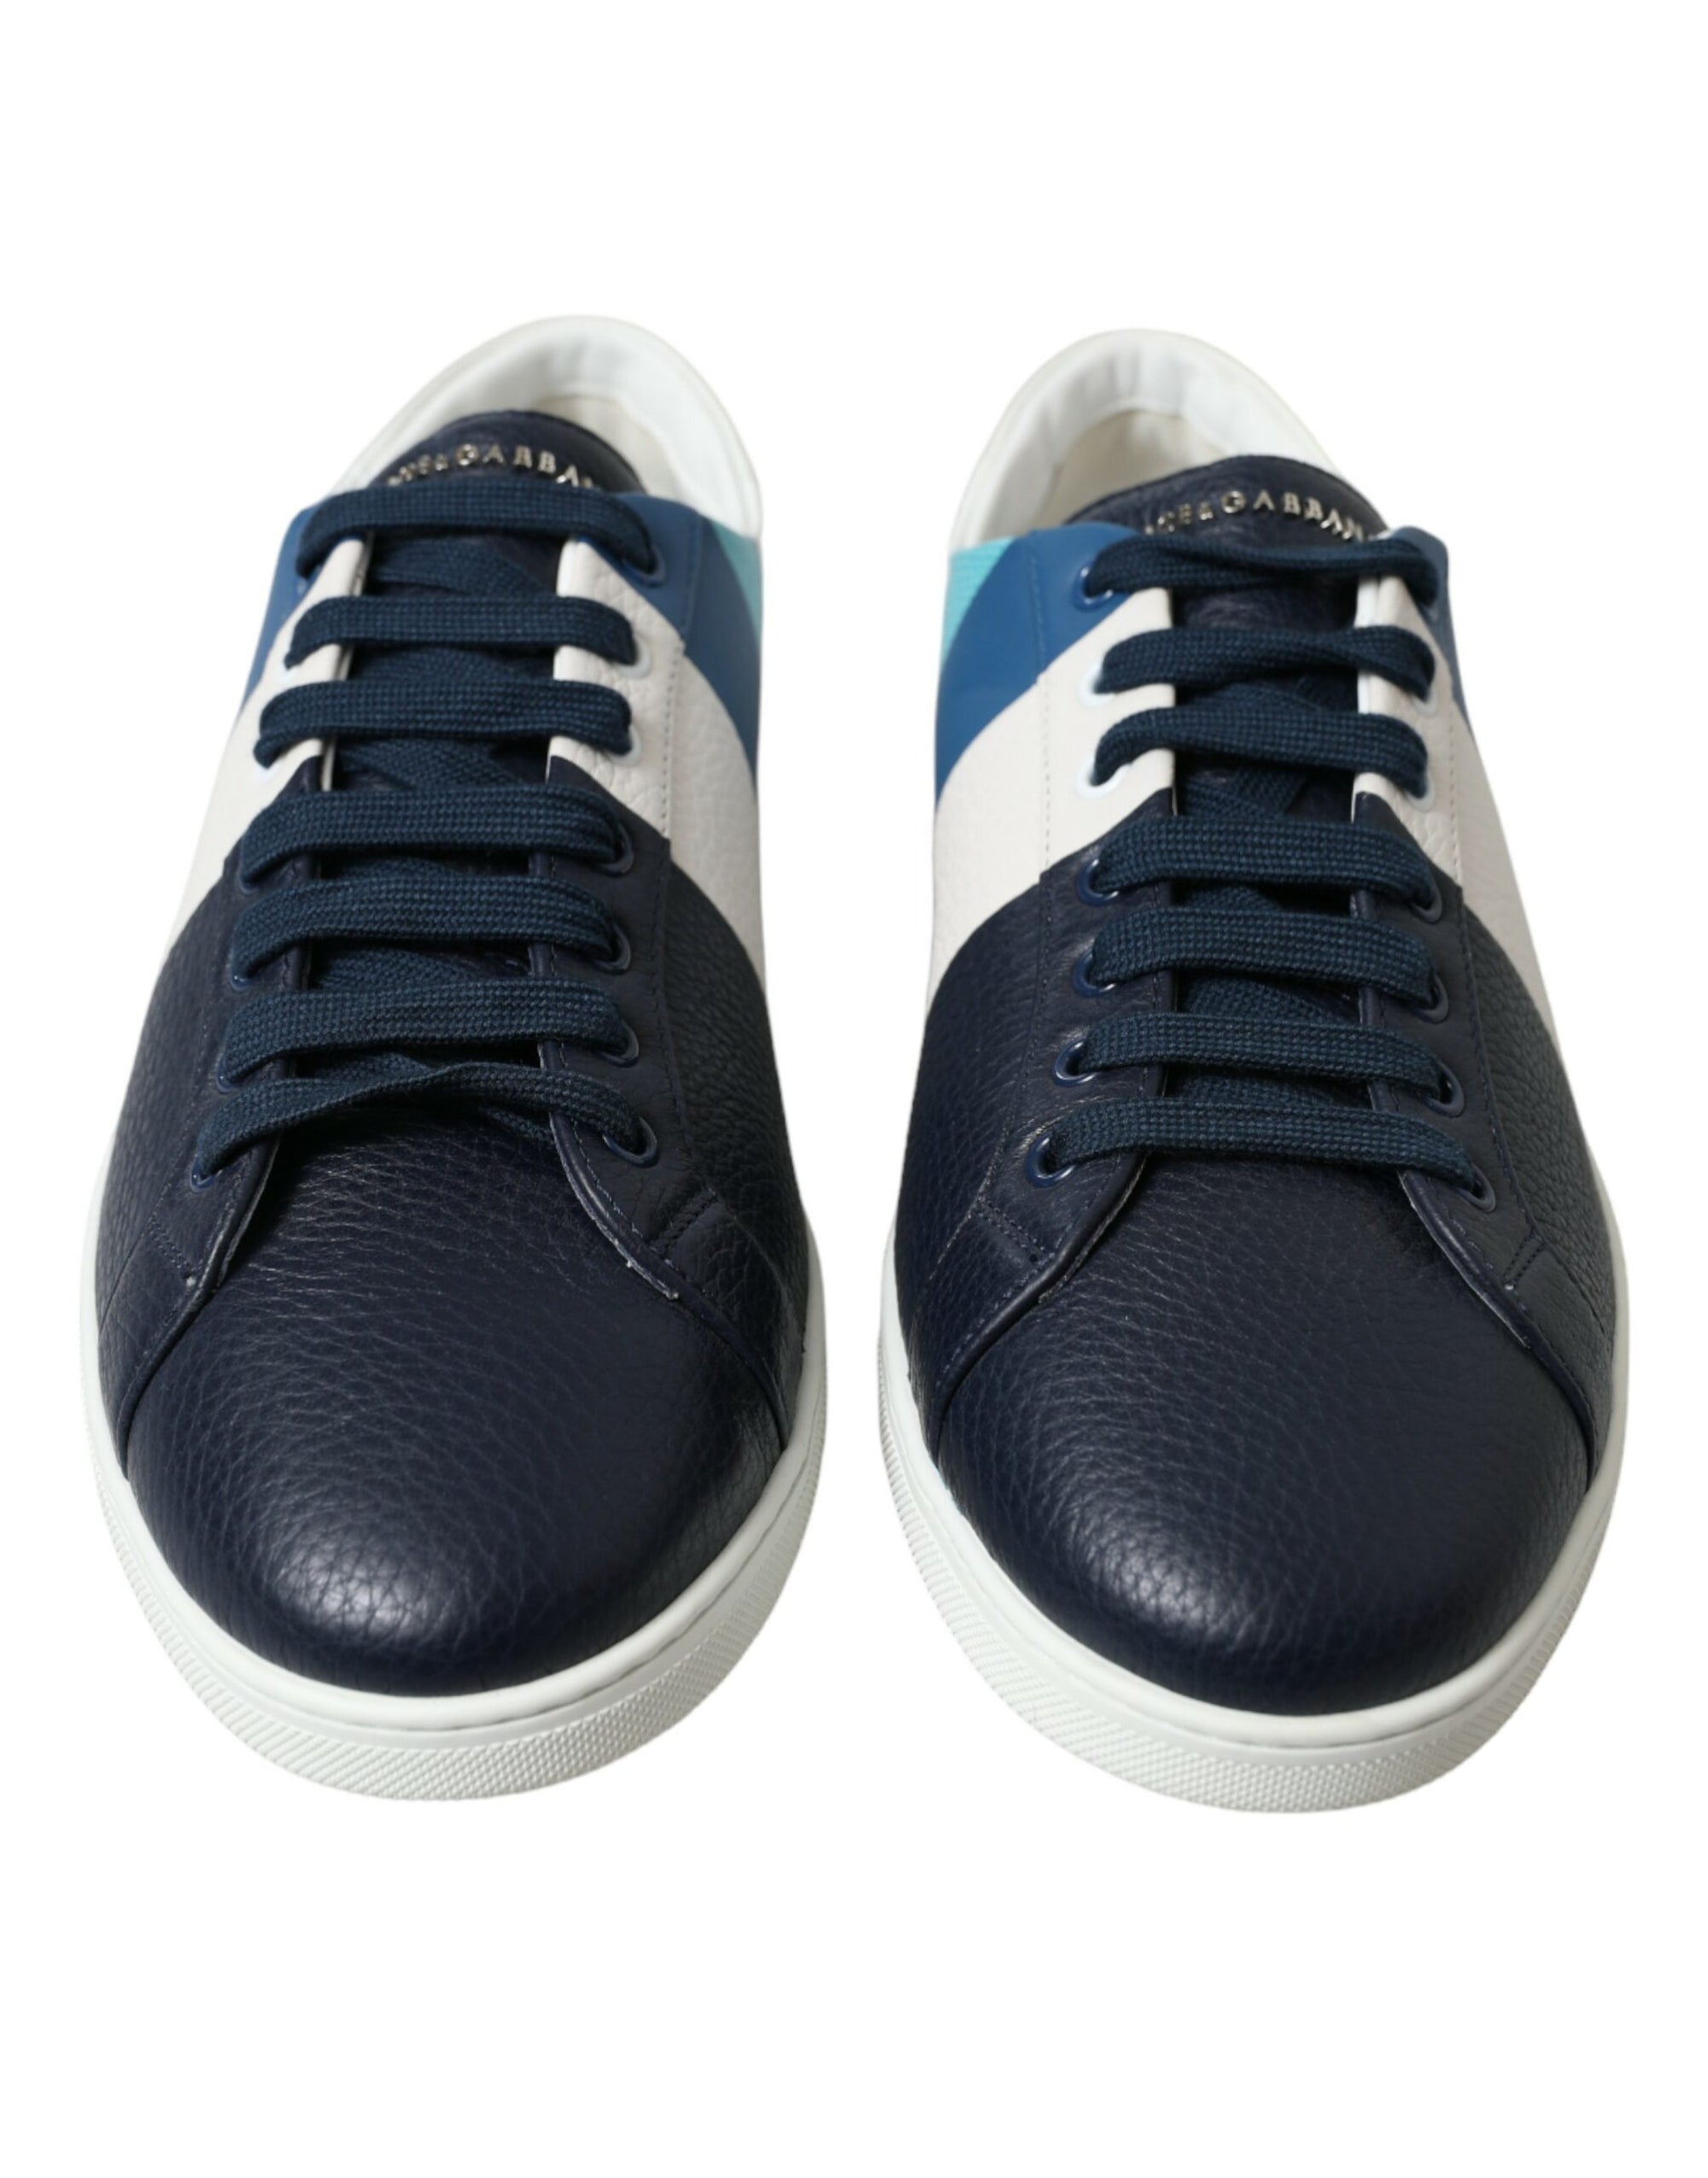 Chic White and Blue Leather Low-Top Sneakers